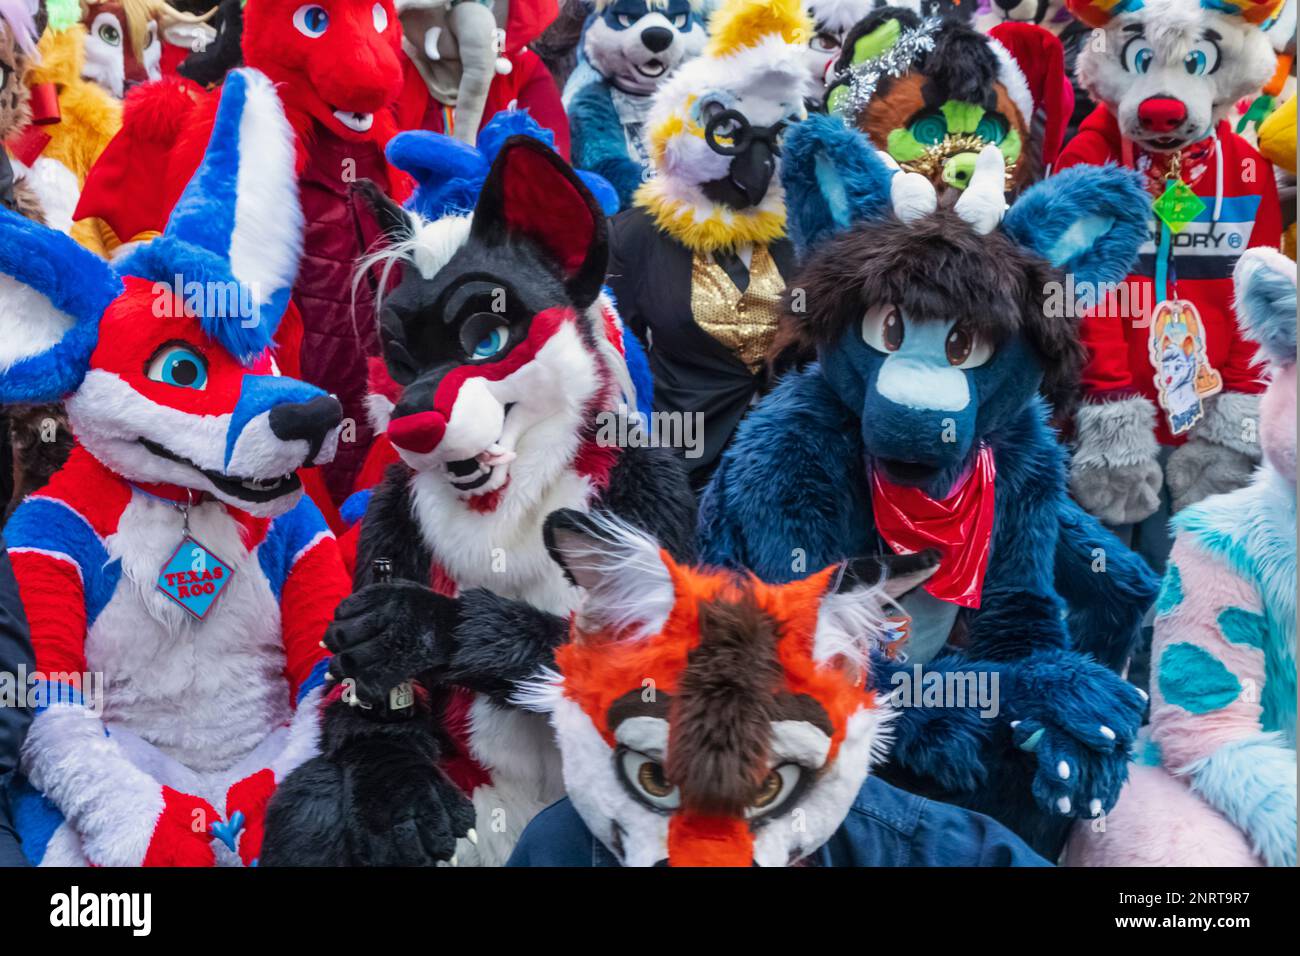 England, London, The City, Members of The London Furs Community Posing for Group Photo Stock Photo